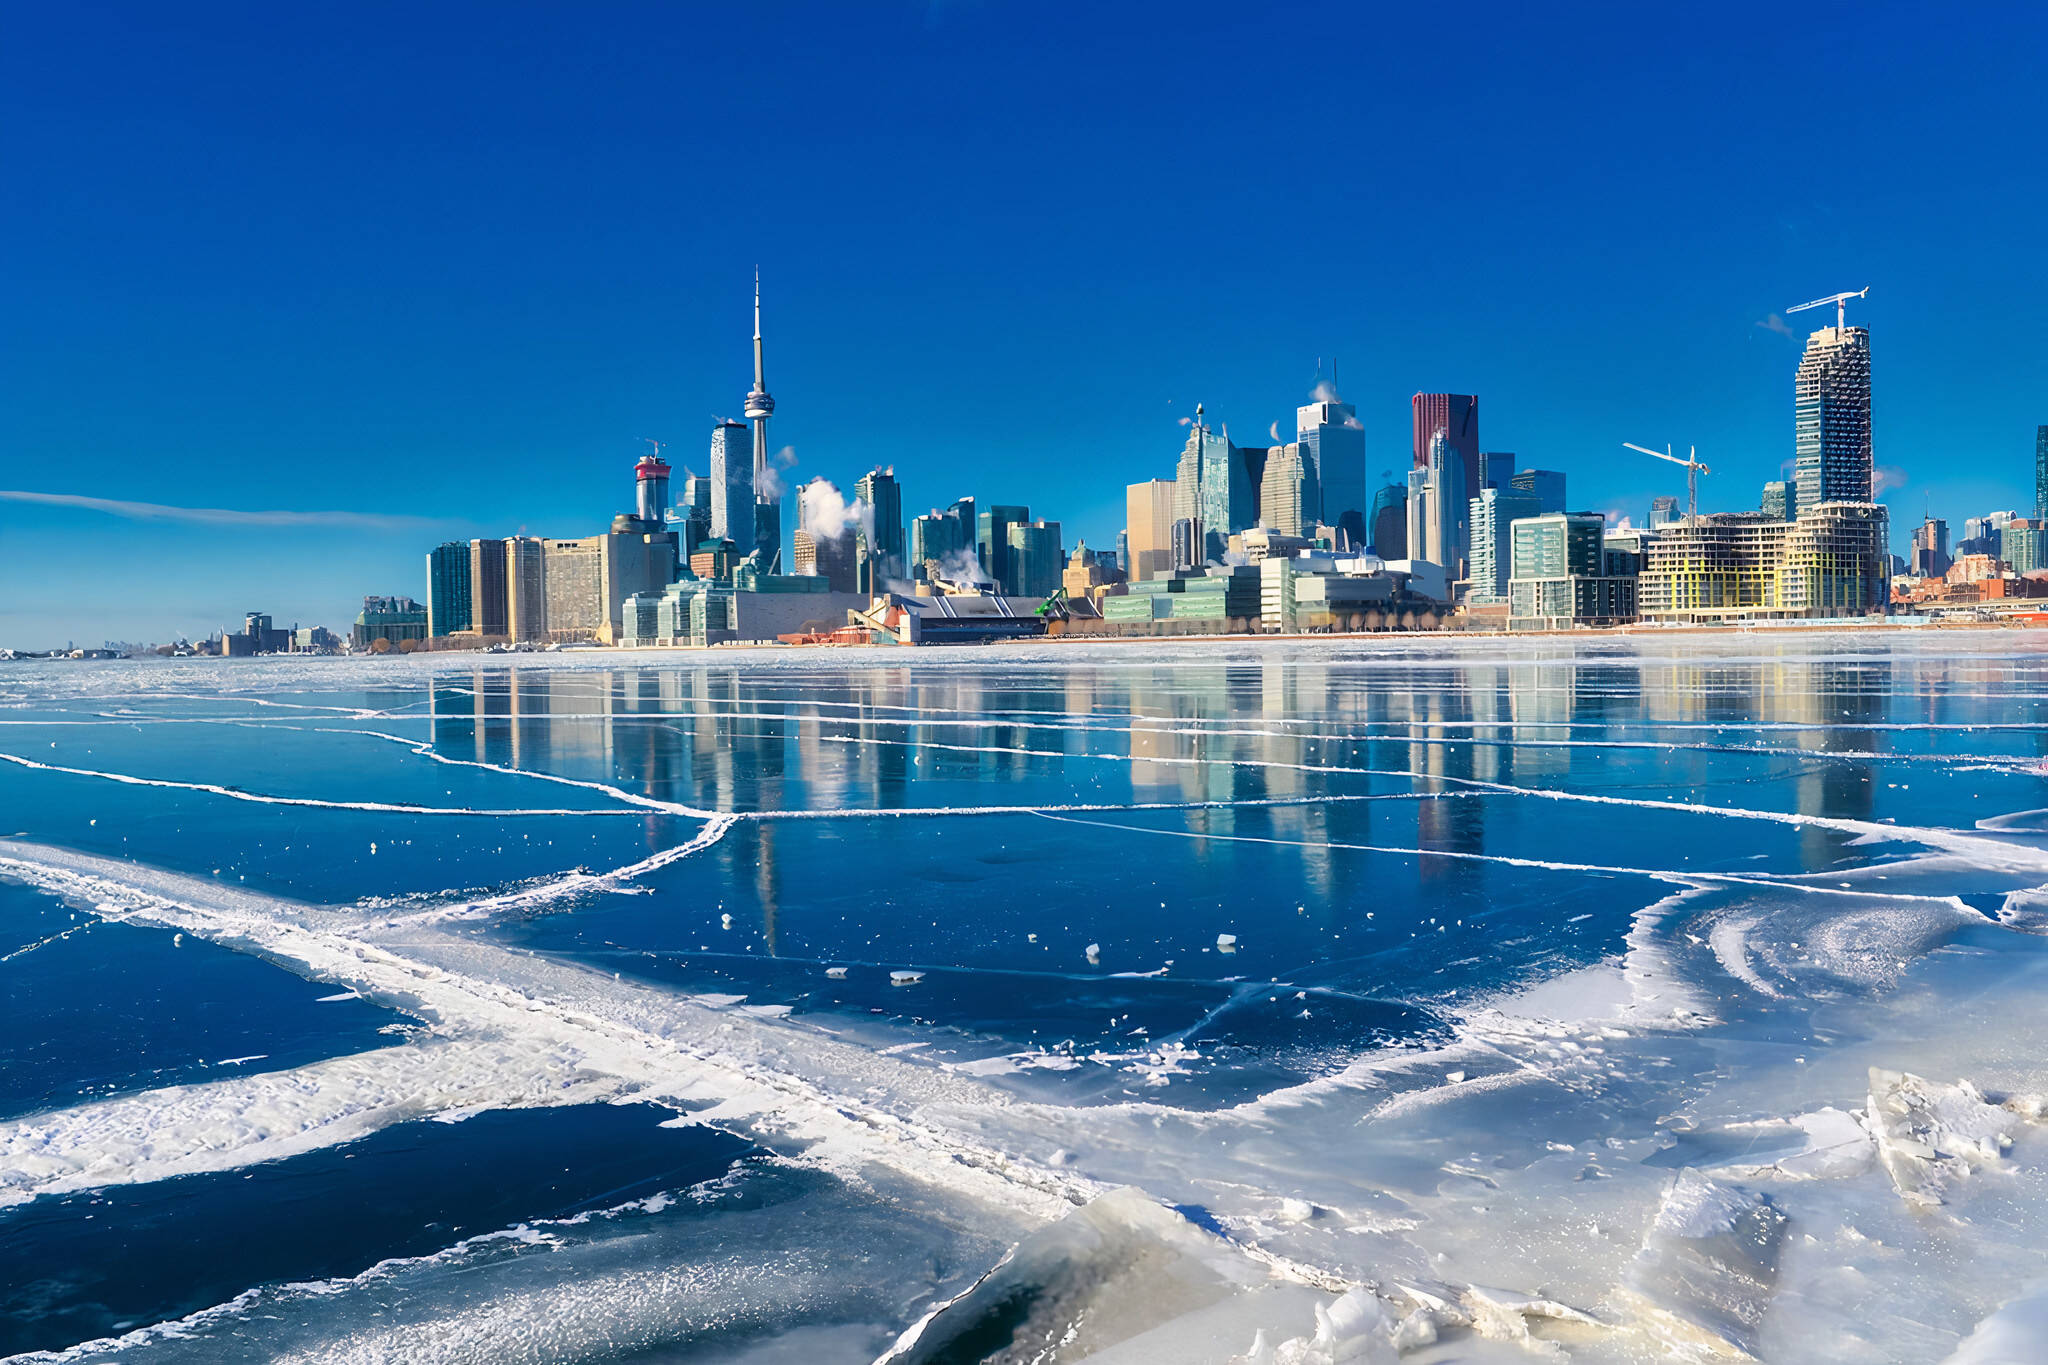 The coldest weather of the season so far is headed for Toronto next week